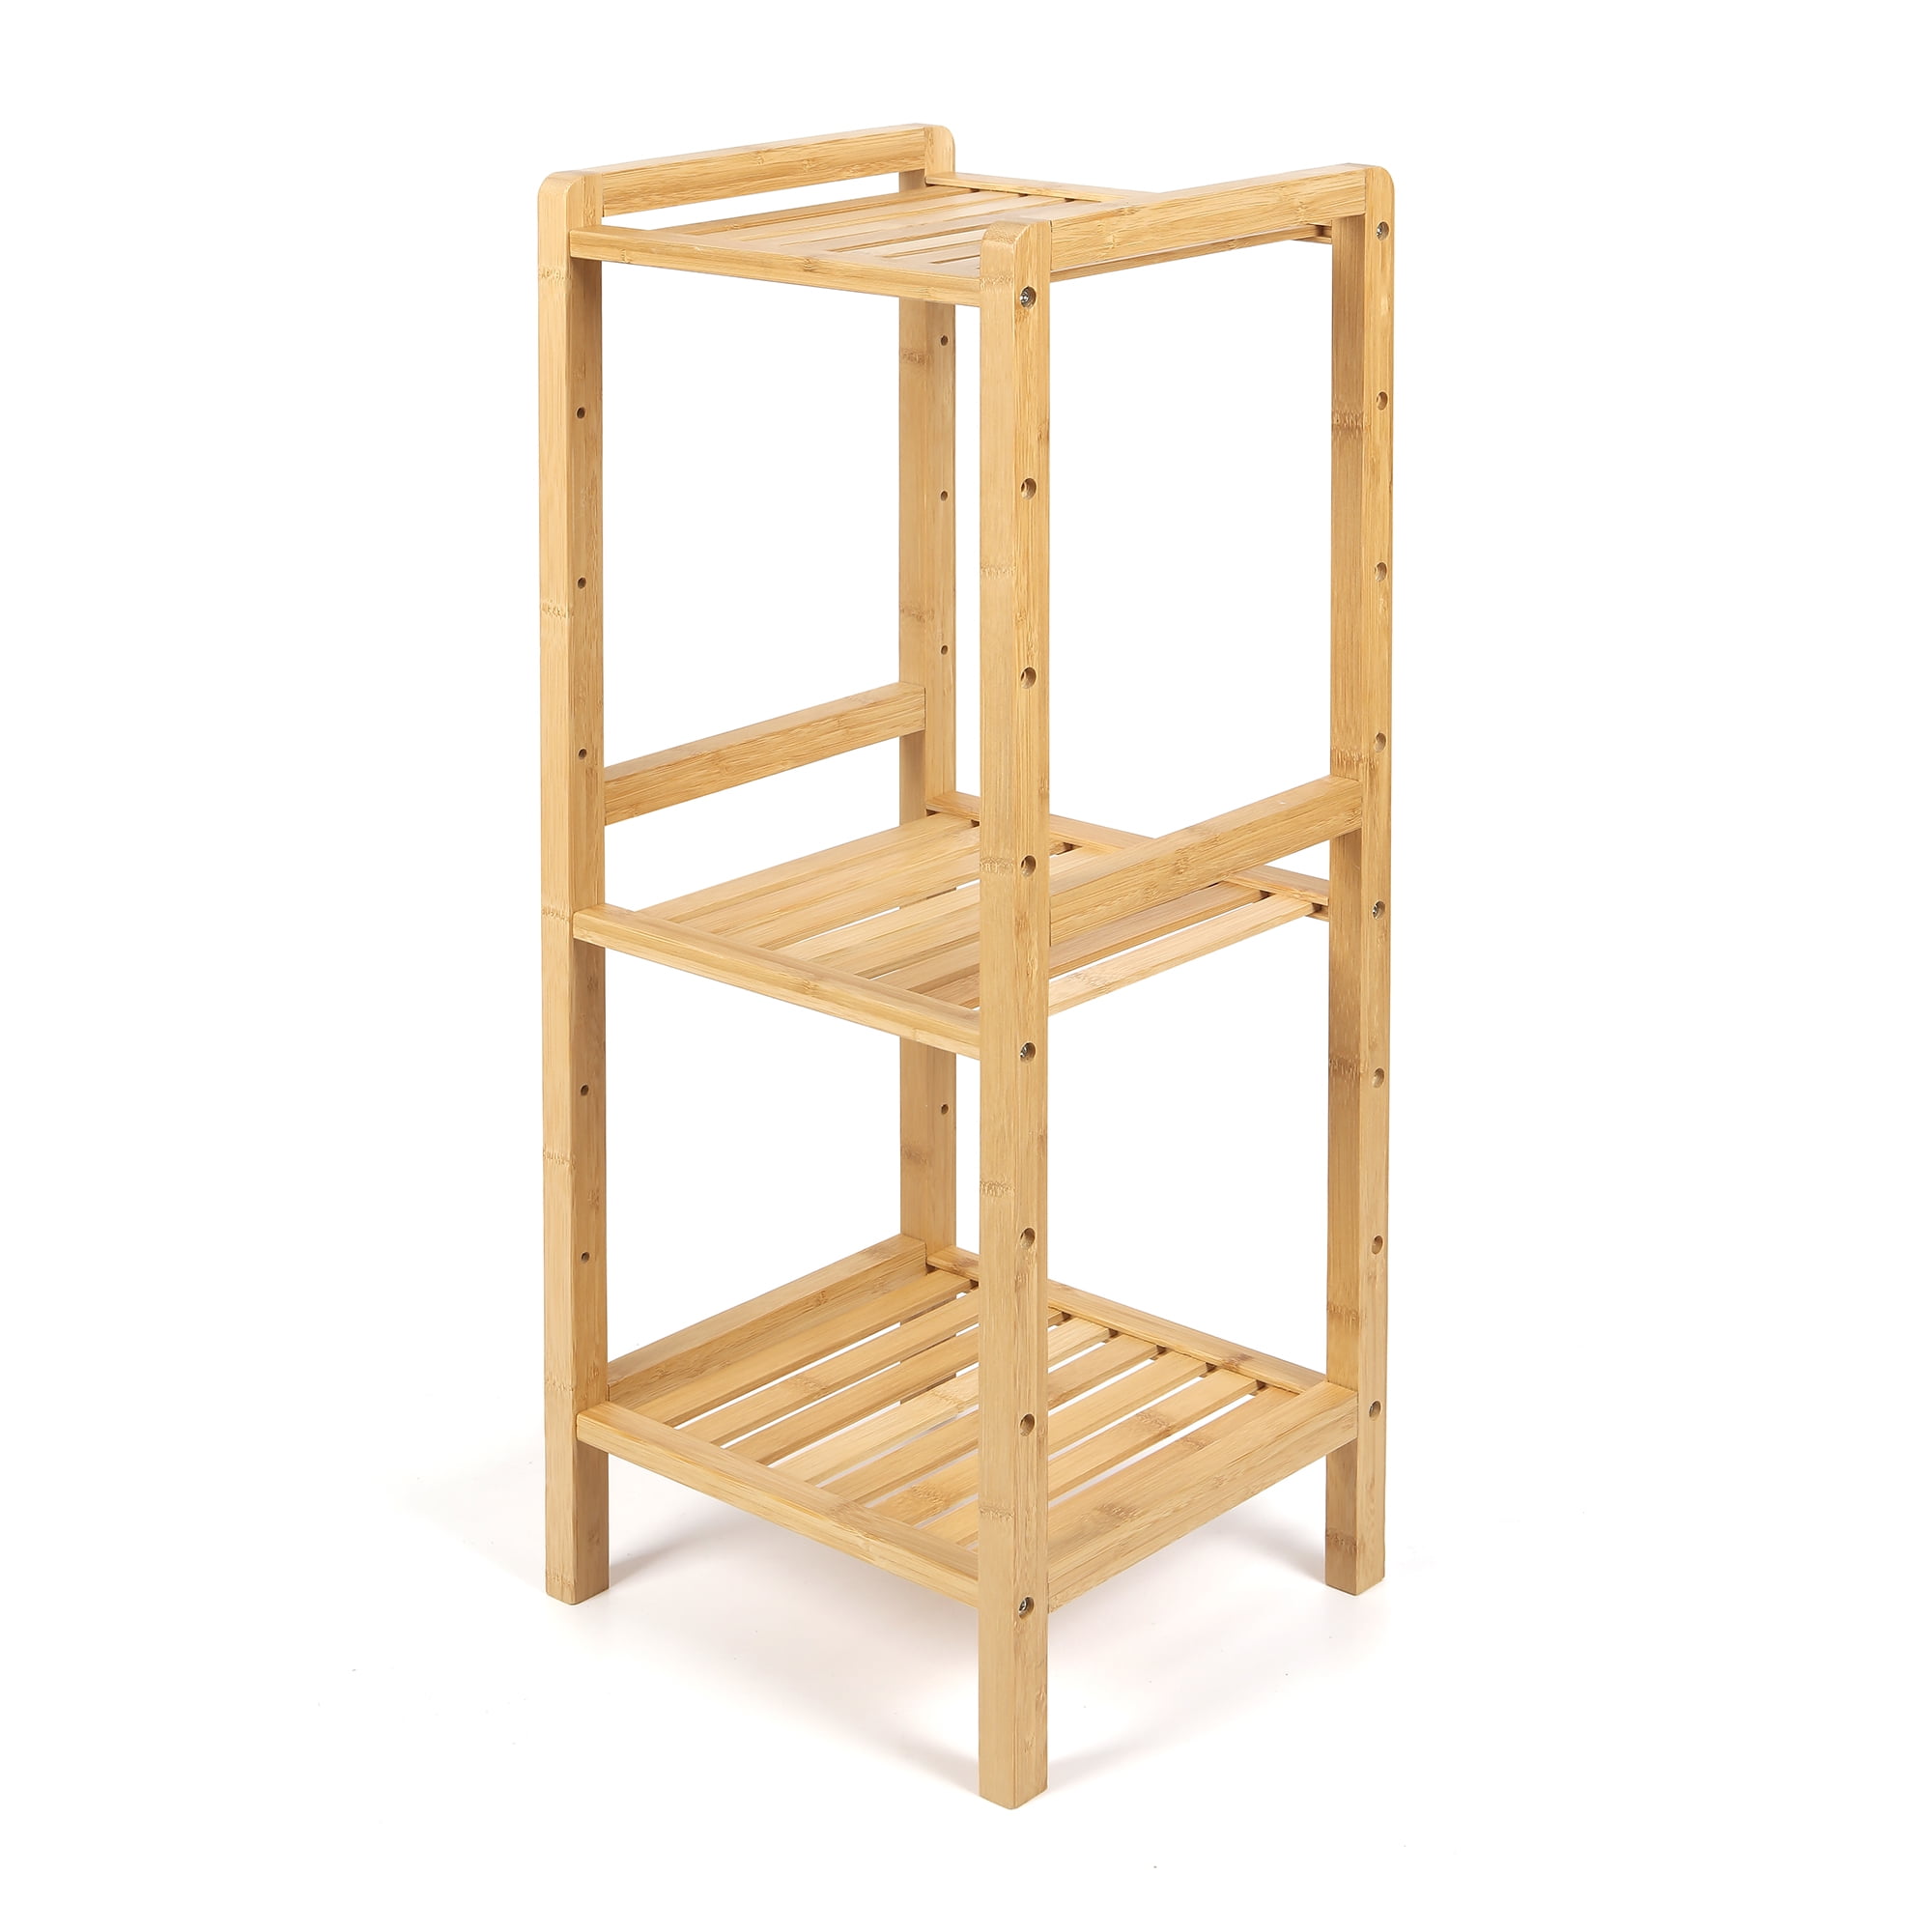 Small Bamboo Side Table with Shelves Wooden 3 Tier Book Storage Telephone Stand 